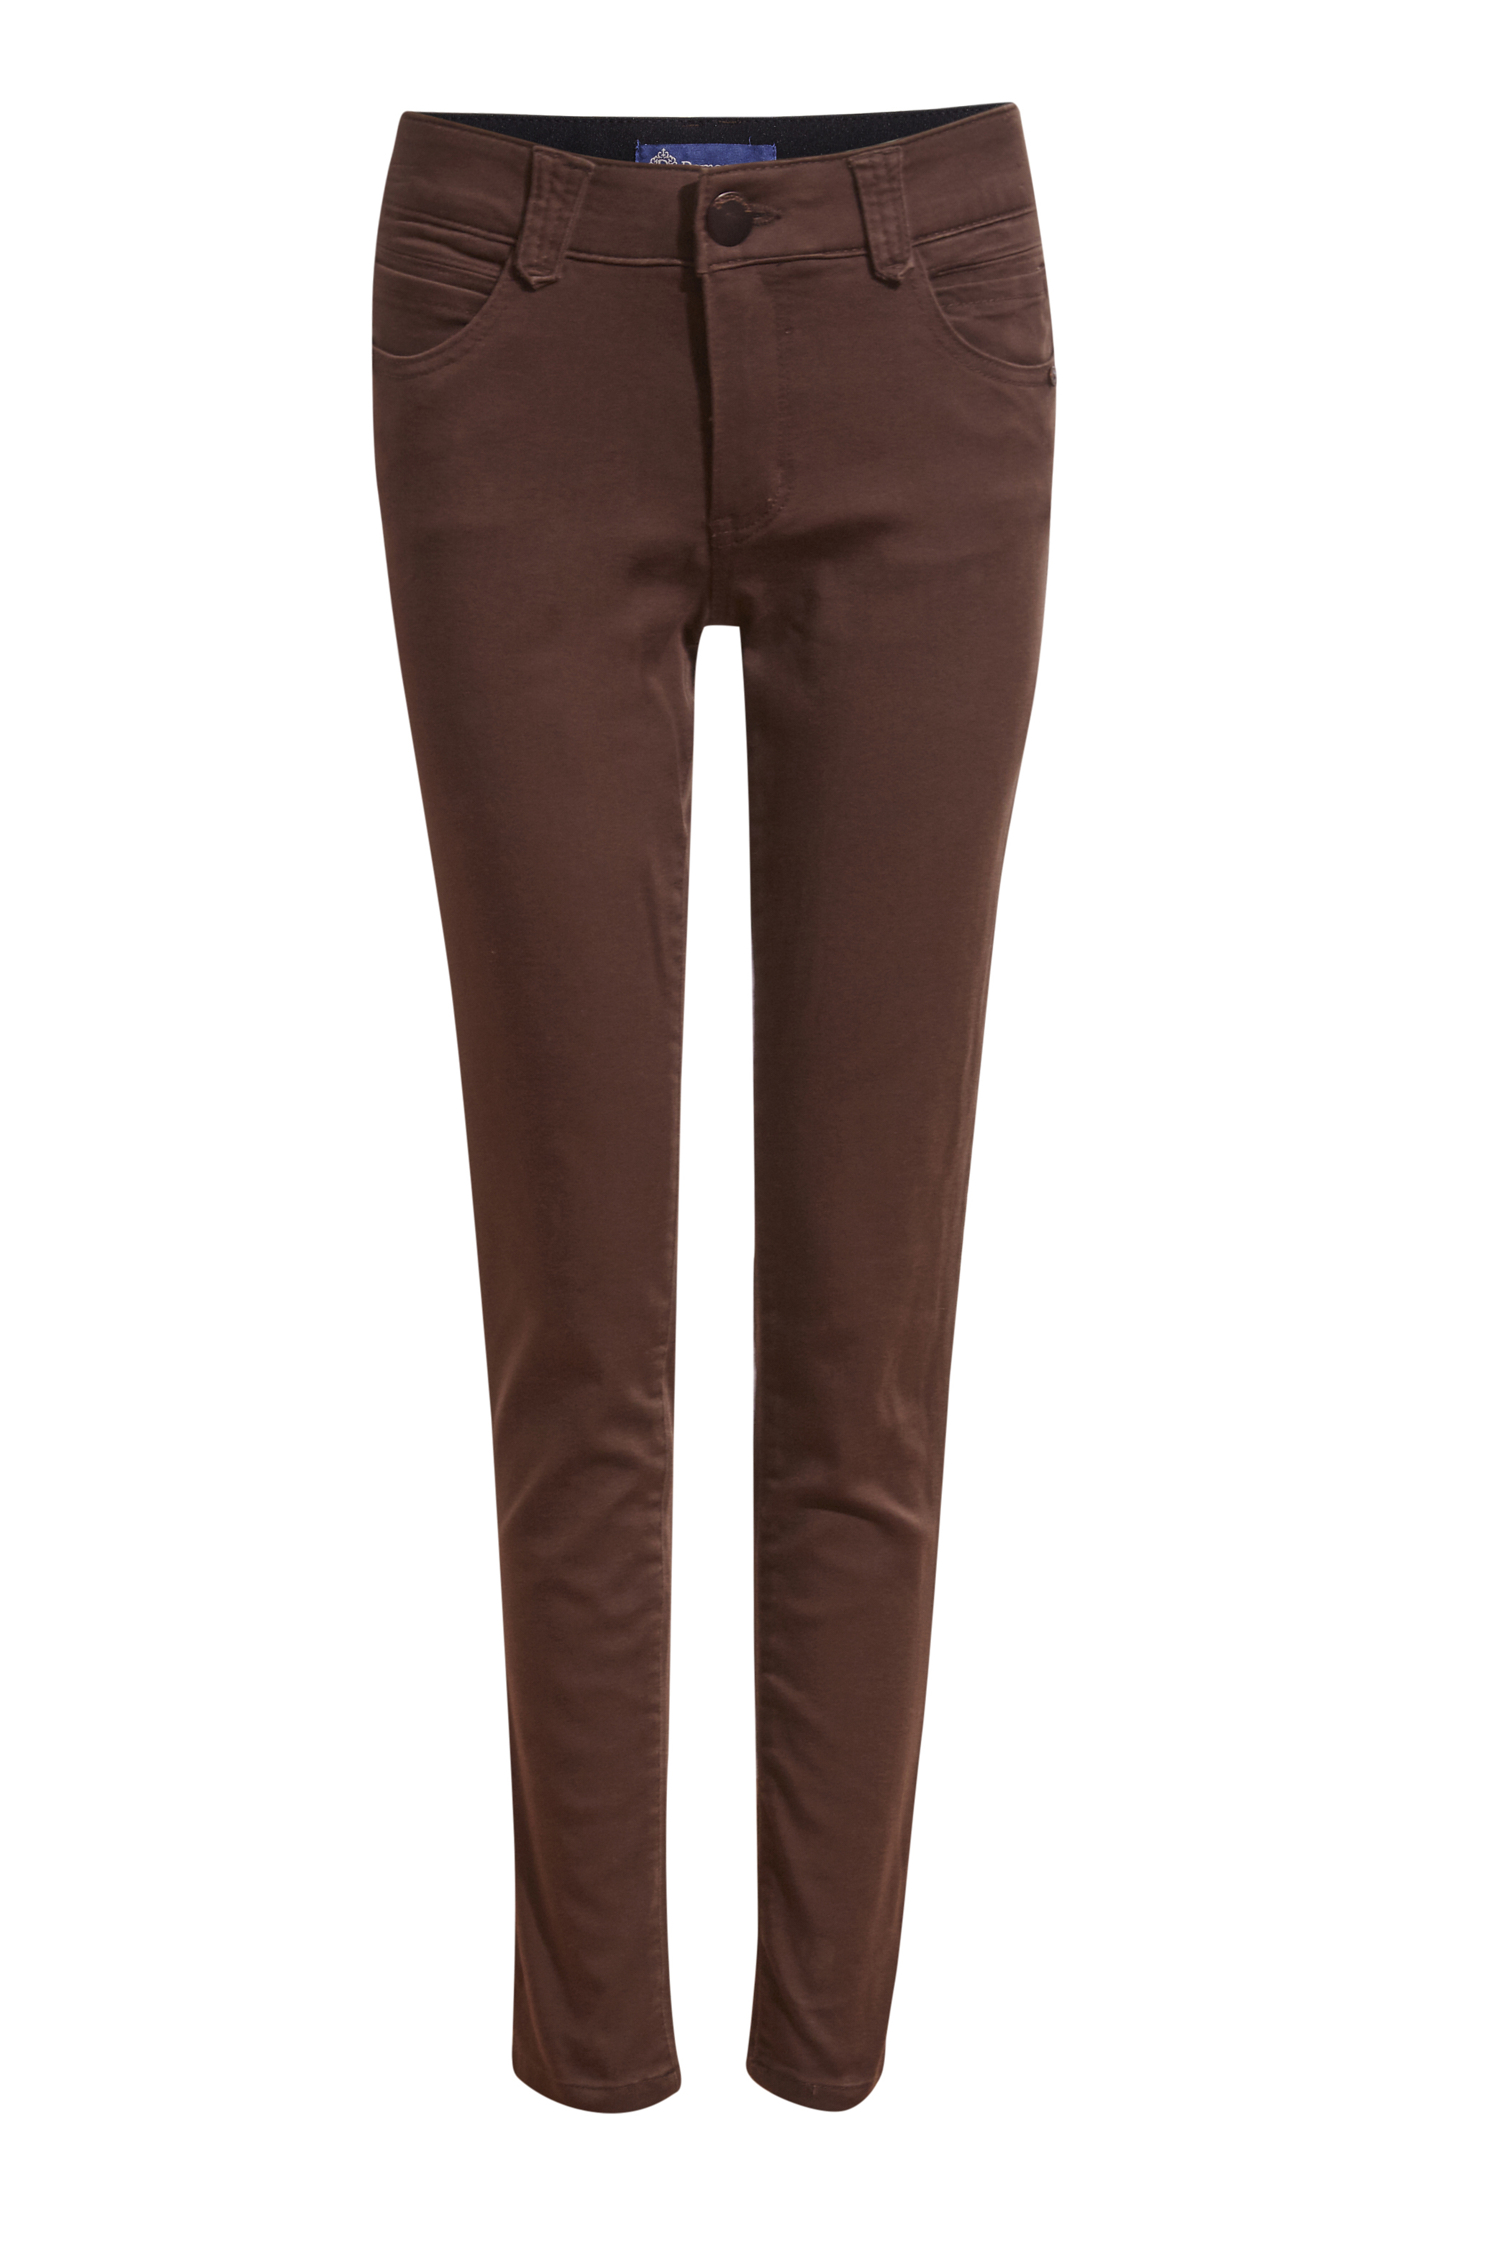 Democracy 'Ab'solution Color Ankle Pant in Brown 16 | DAILYLOOK